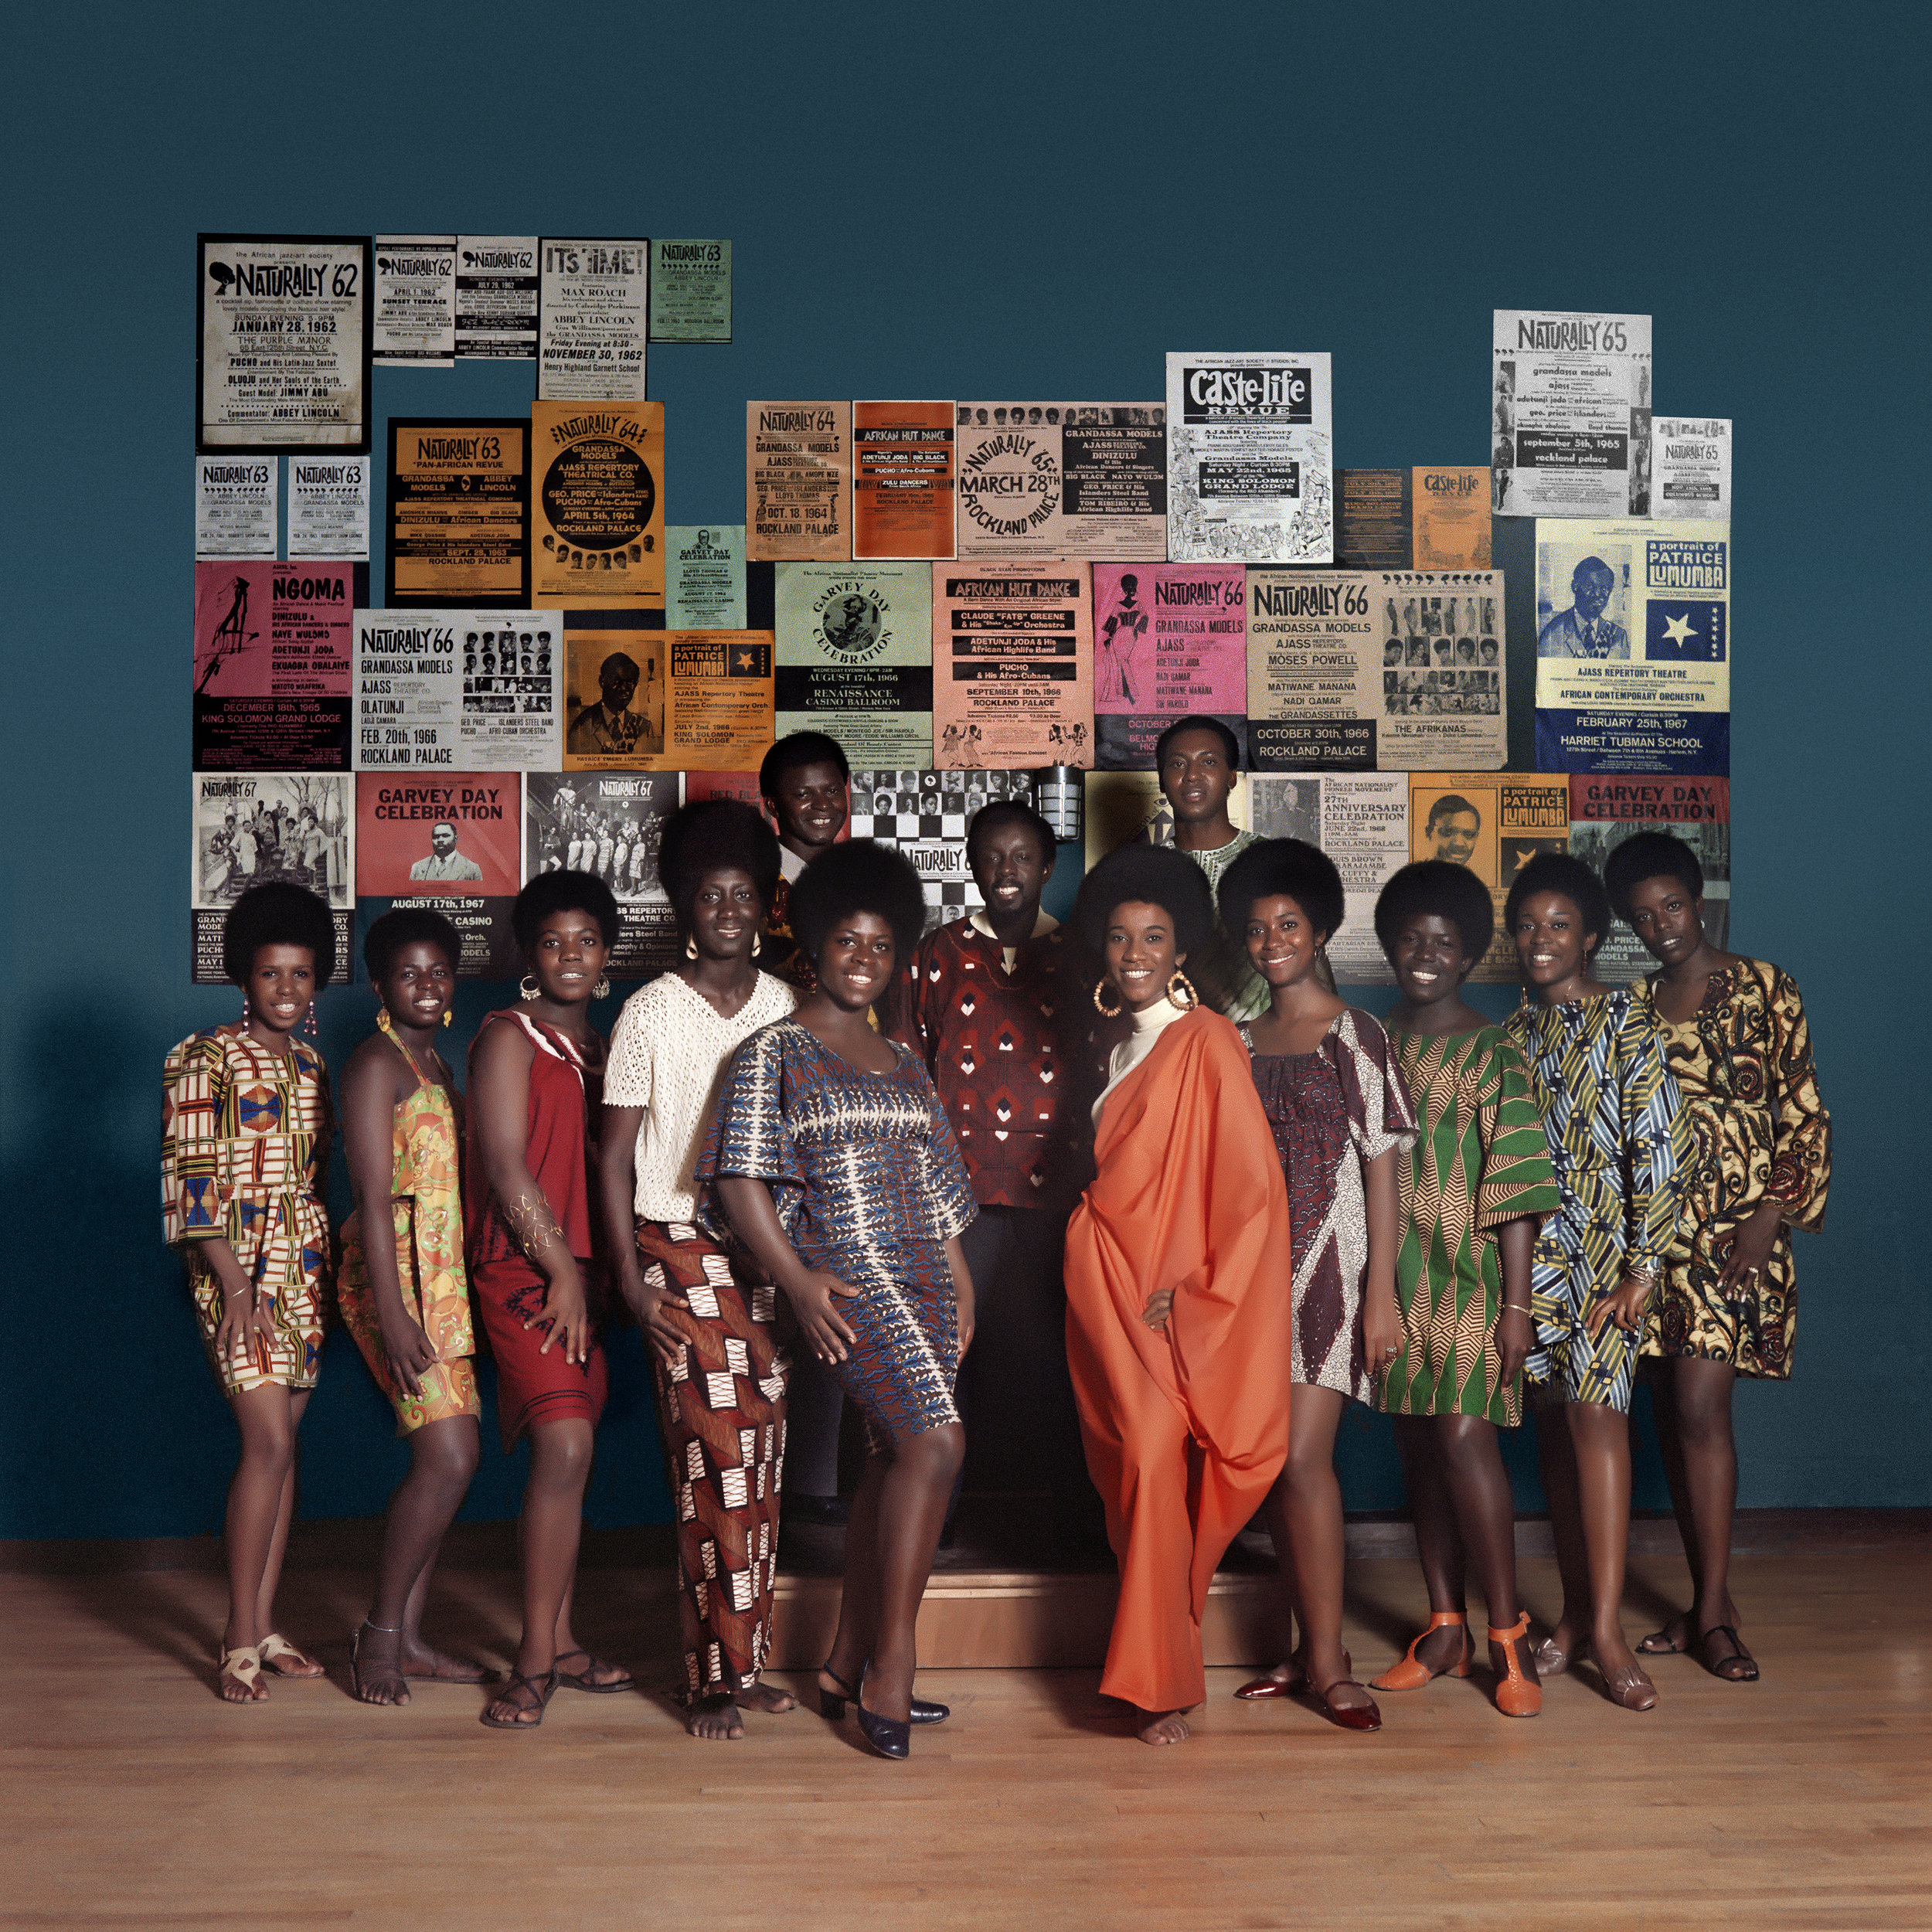  Kwame Brathwaite. “Naturally ’68” photo shoot, featuring Grandassa Models and founding members of AJASS. Back row includes: Eleanor Ballard, far left; Sikolo Brathwaite, third from left; Juanita McLean, fourth from left; Zeta Gathers, fifth from lef